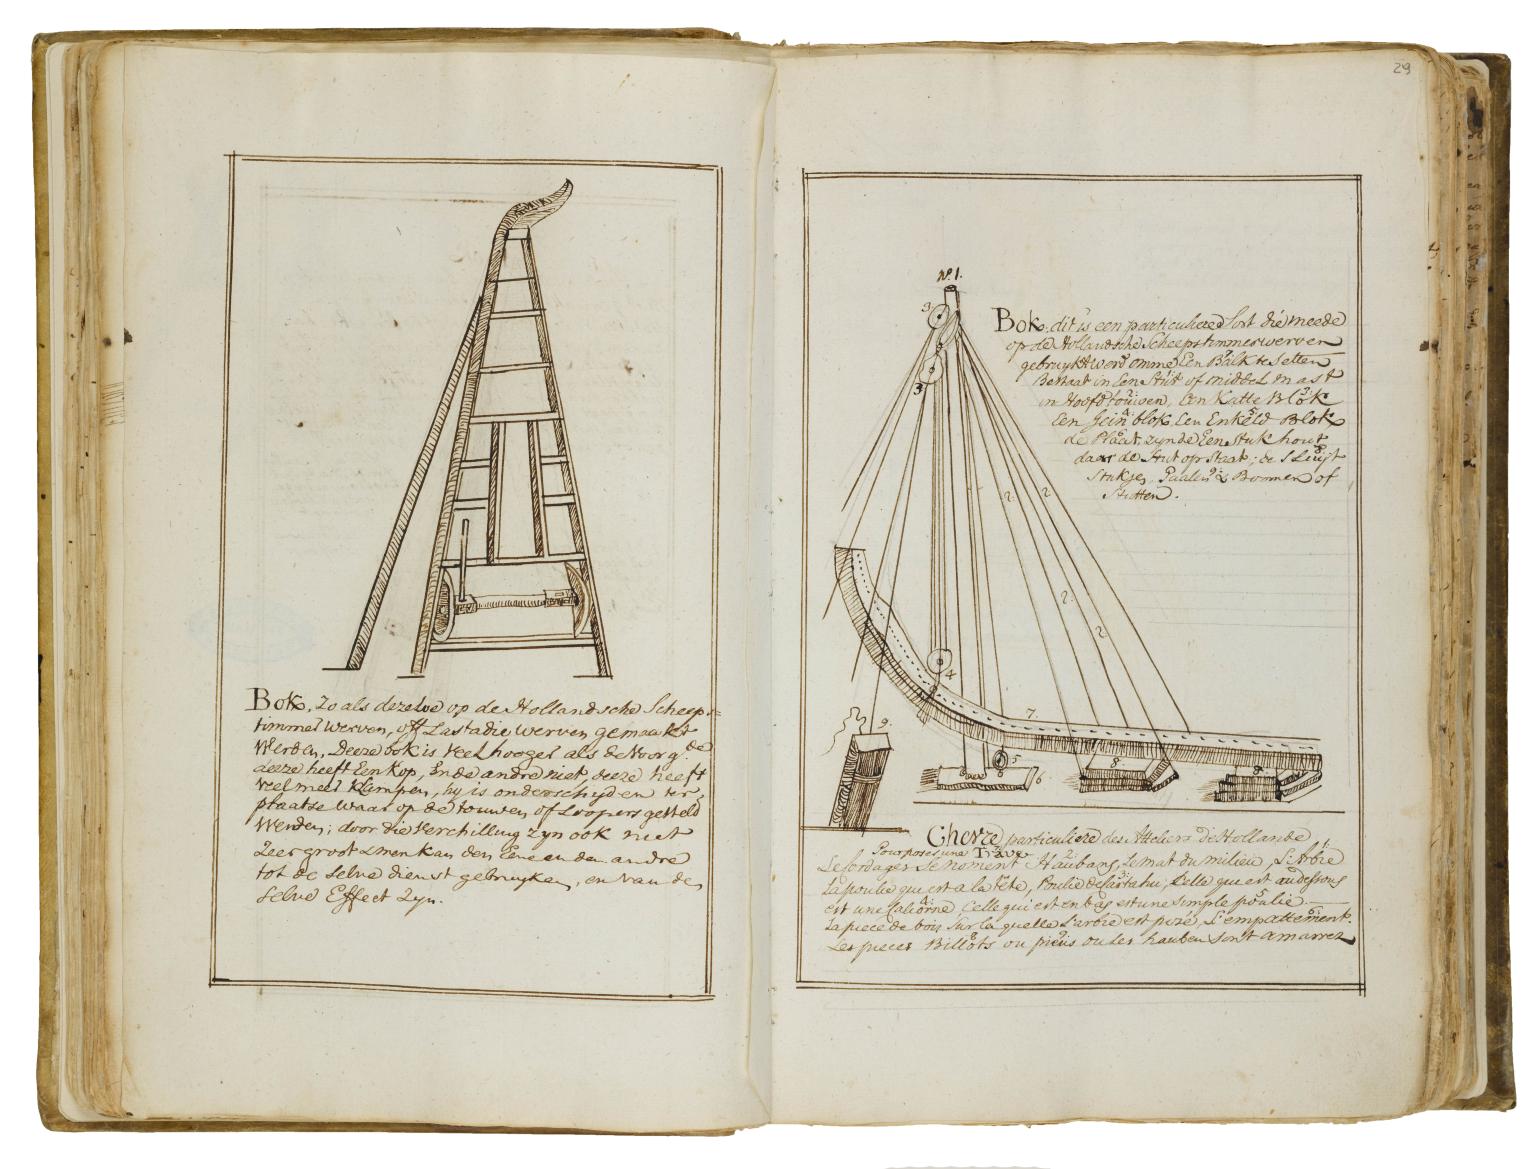 Facing-page text with drawing of ladder on left side and Dutch writing underneath, and drawing of ship part on right side with Dutch text above and below.